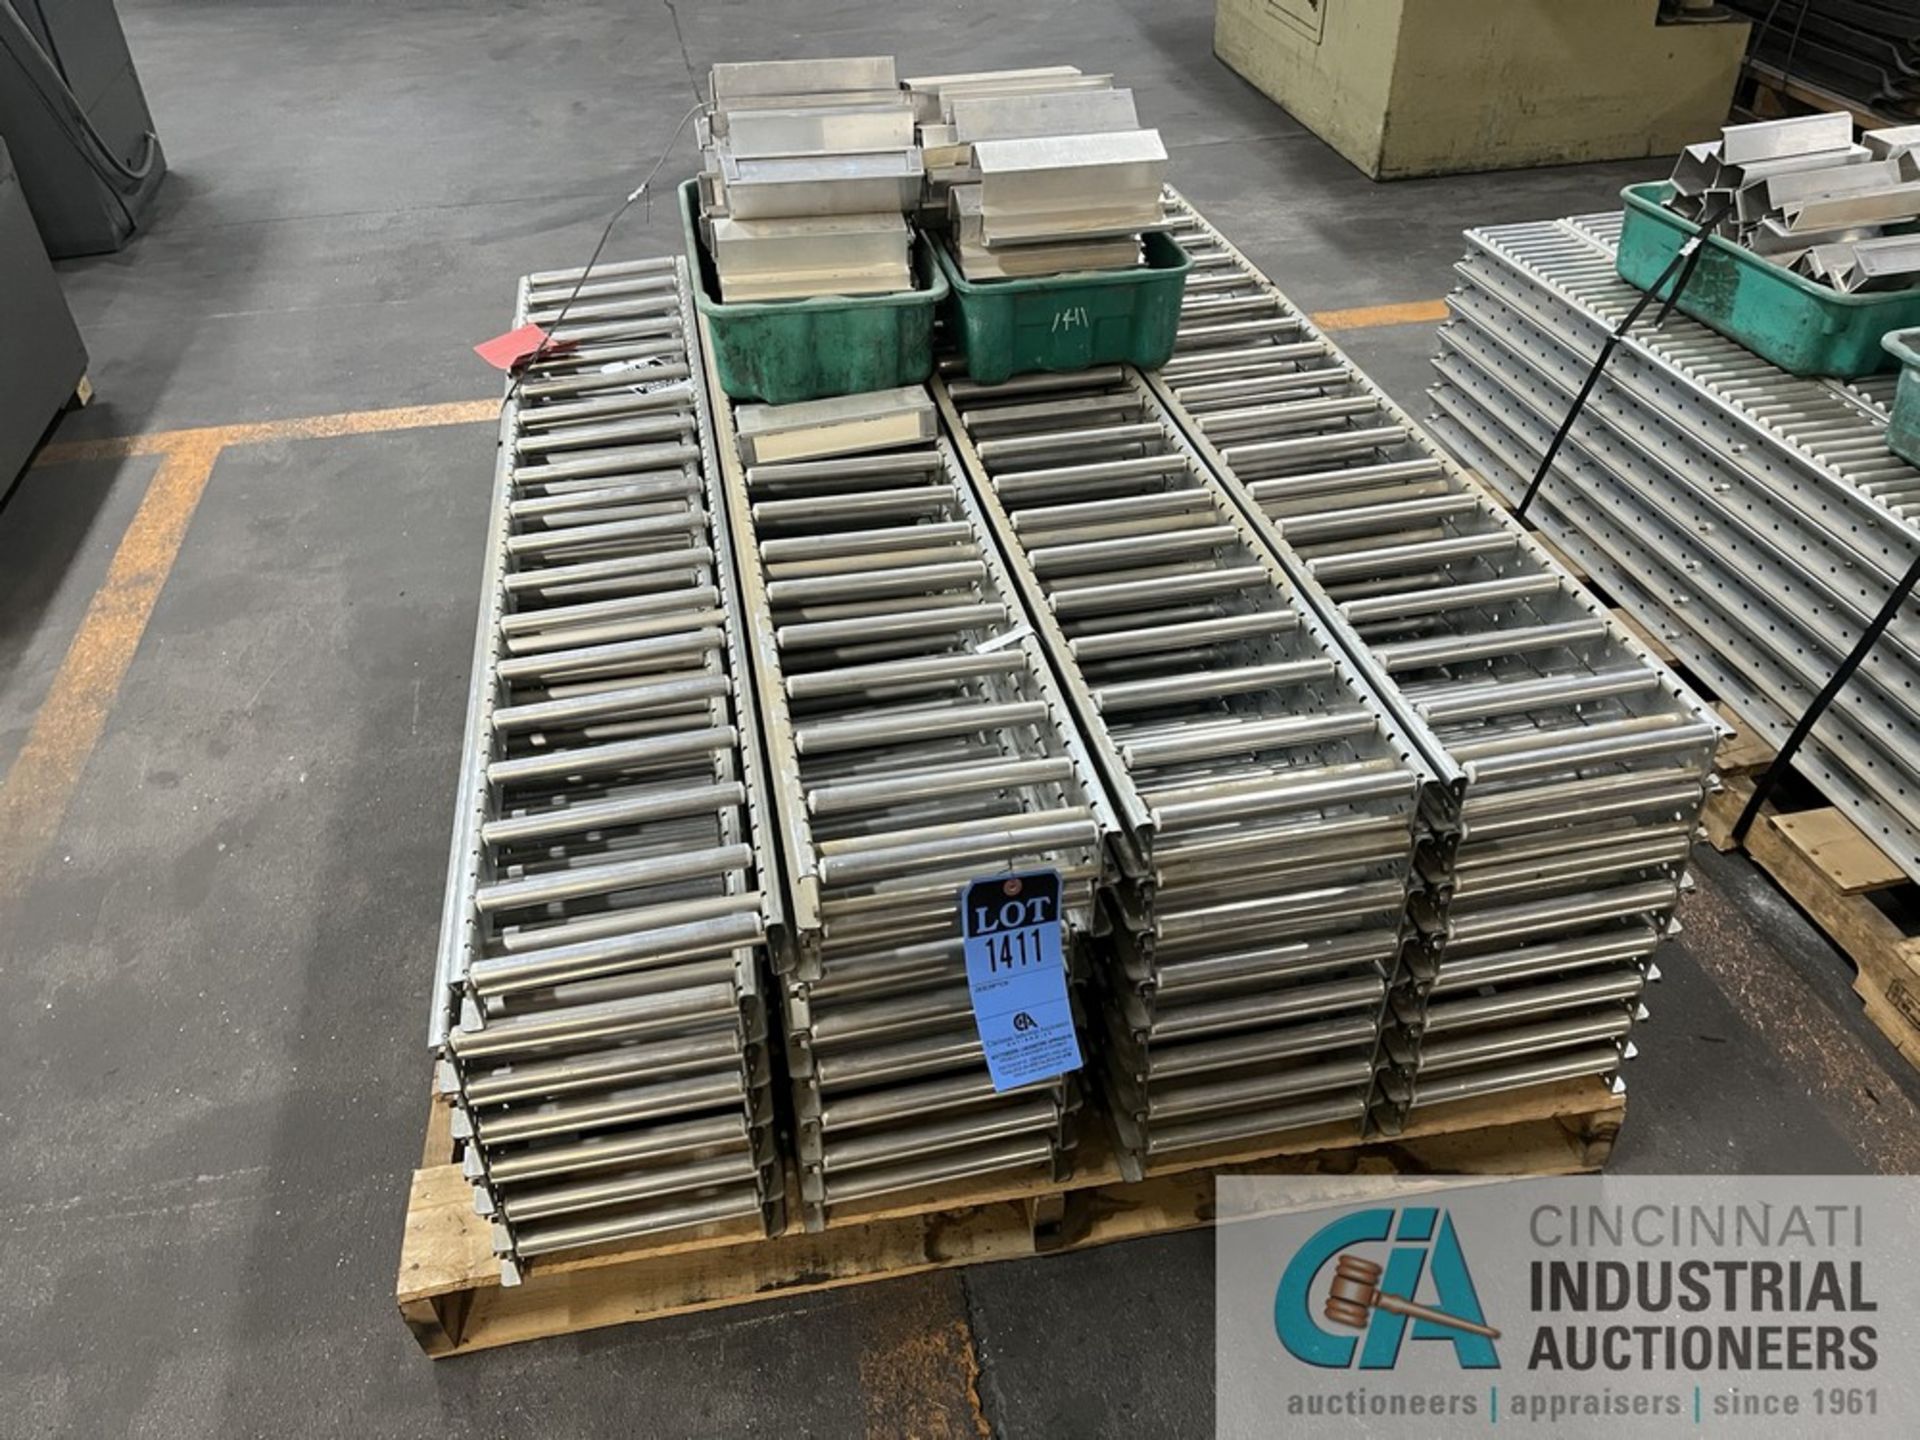 SKID OF 8" ALUMINUM ROLLER CONVEYOR; 55" LENGTH, (31) SECTIONS BOX OF HANGERS BANDED ON SKID